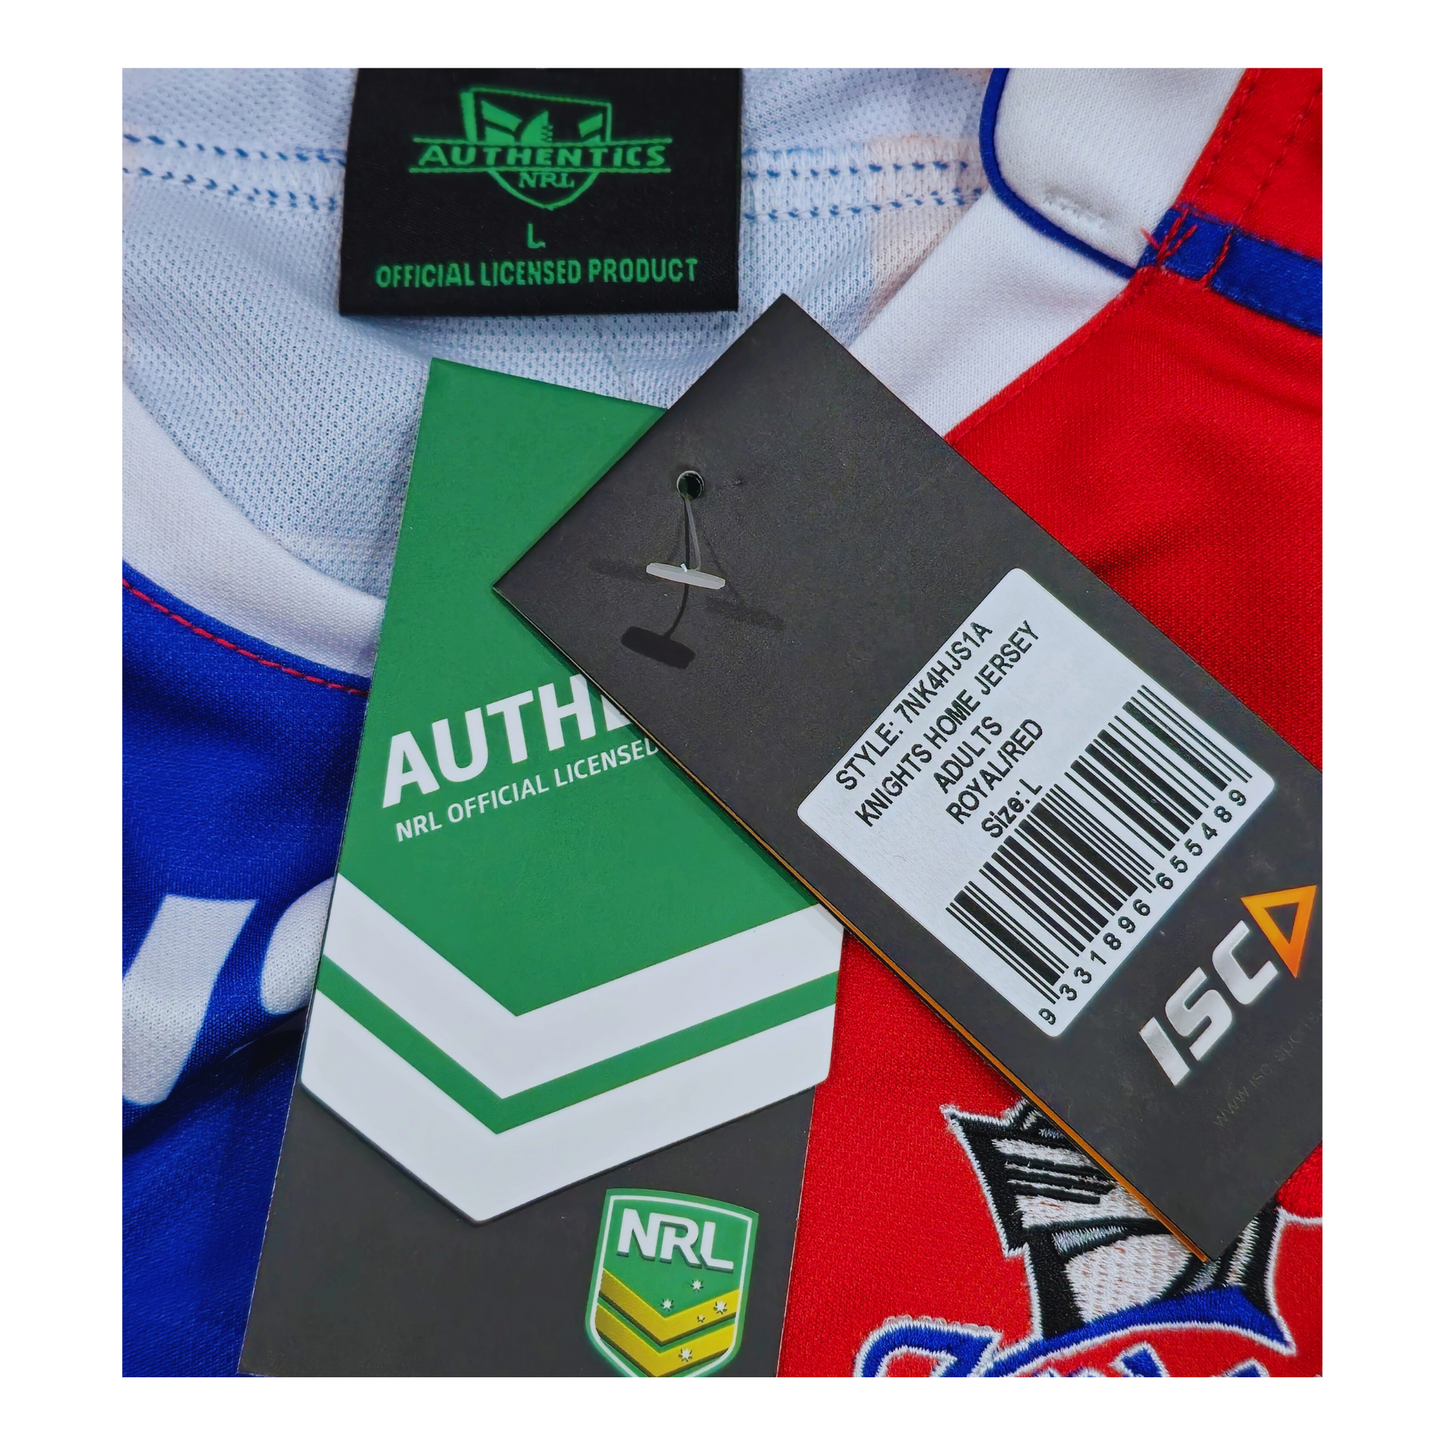 Newcastle Knights 2013/14 Home Jersey